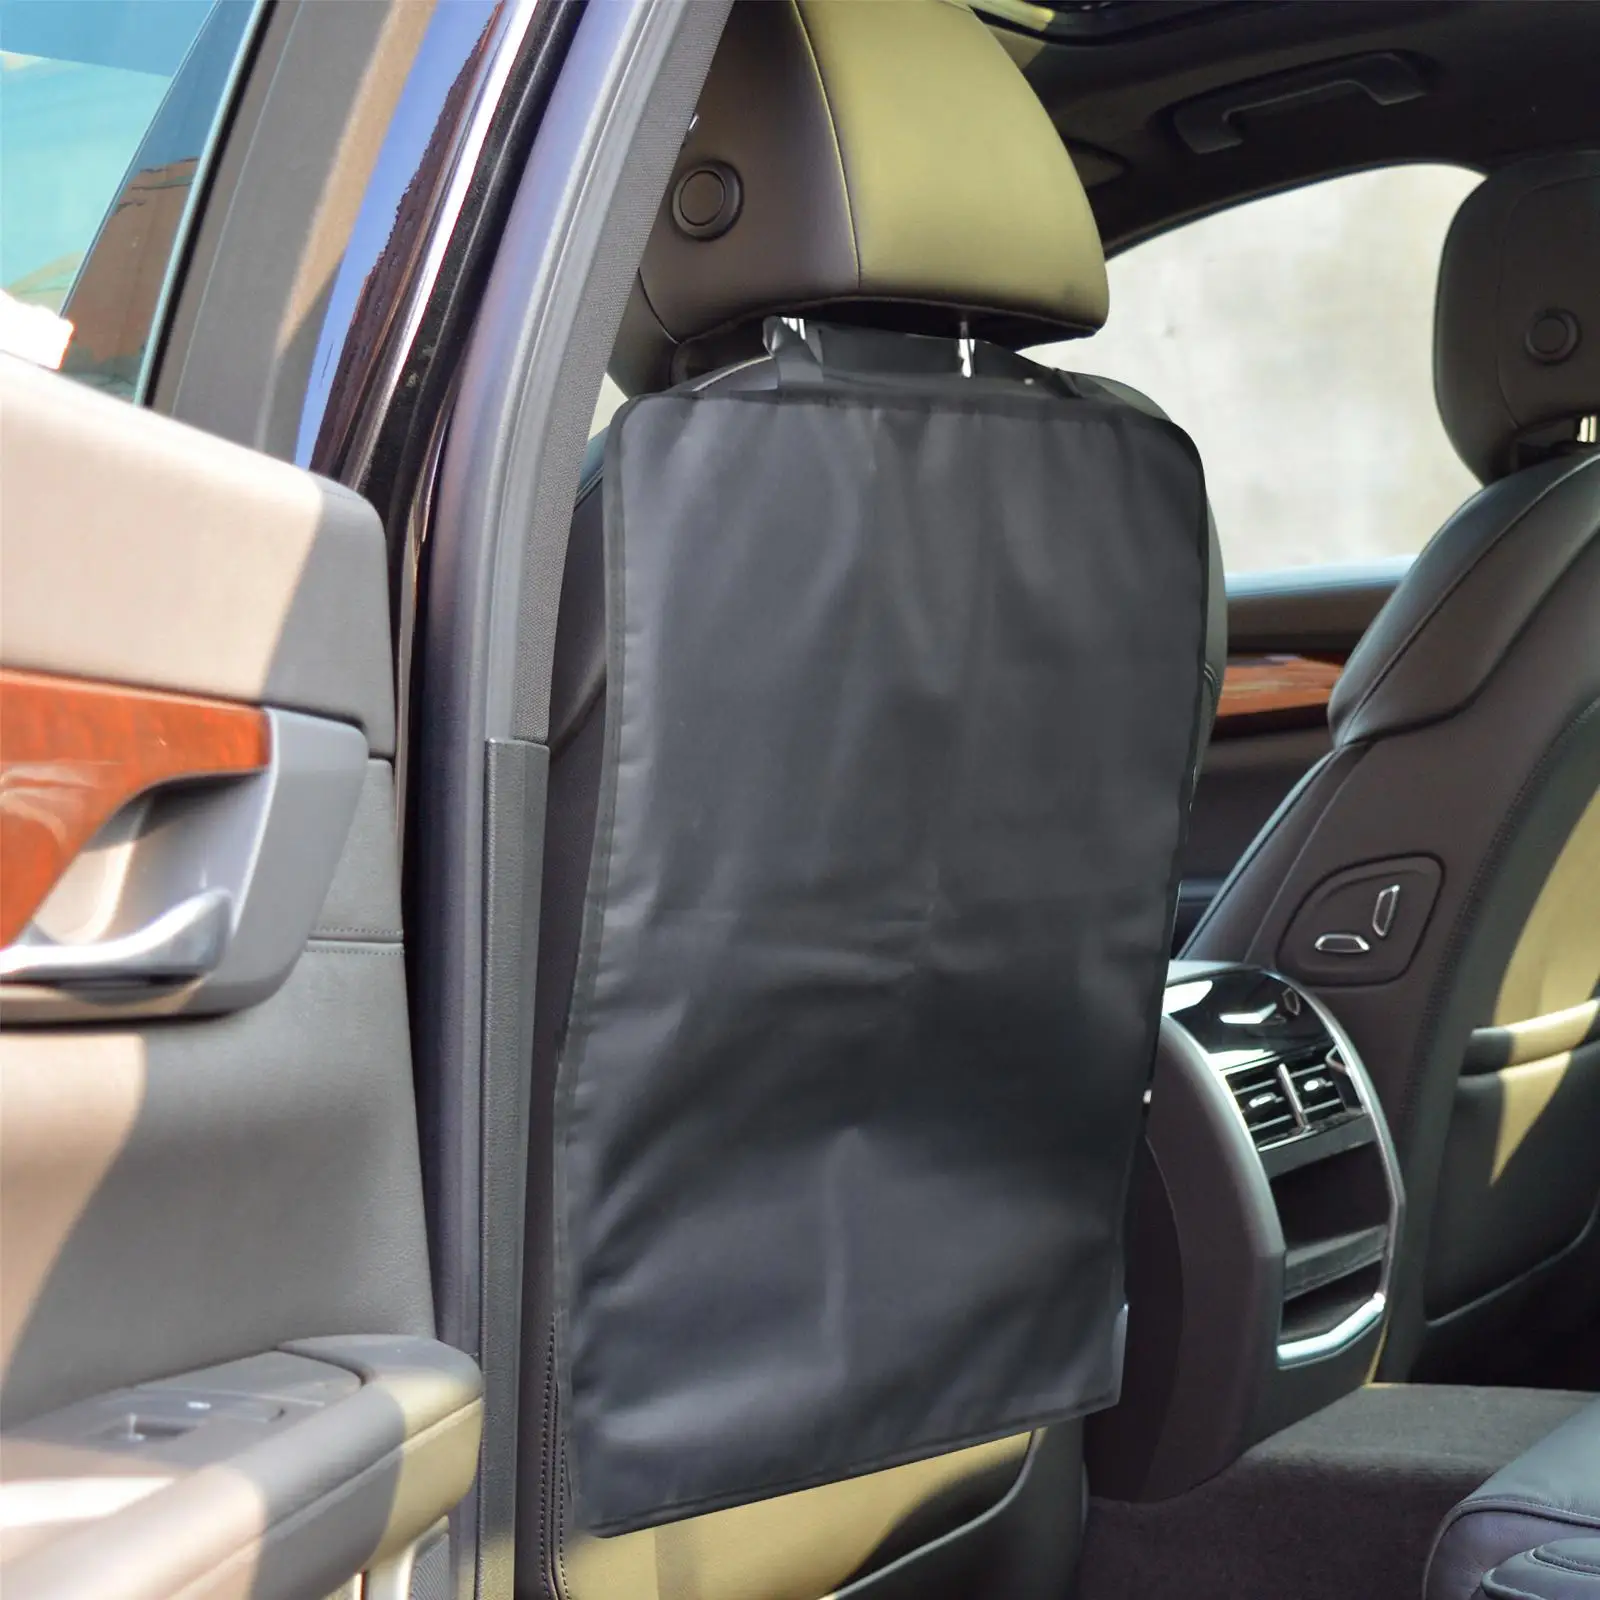 Auto Kick Mats Waterproof Easy to Easy to Install Child Kick Guard Car Seat Protector for Most Suvs and Vans Vehicles